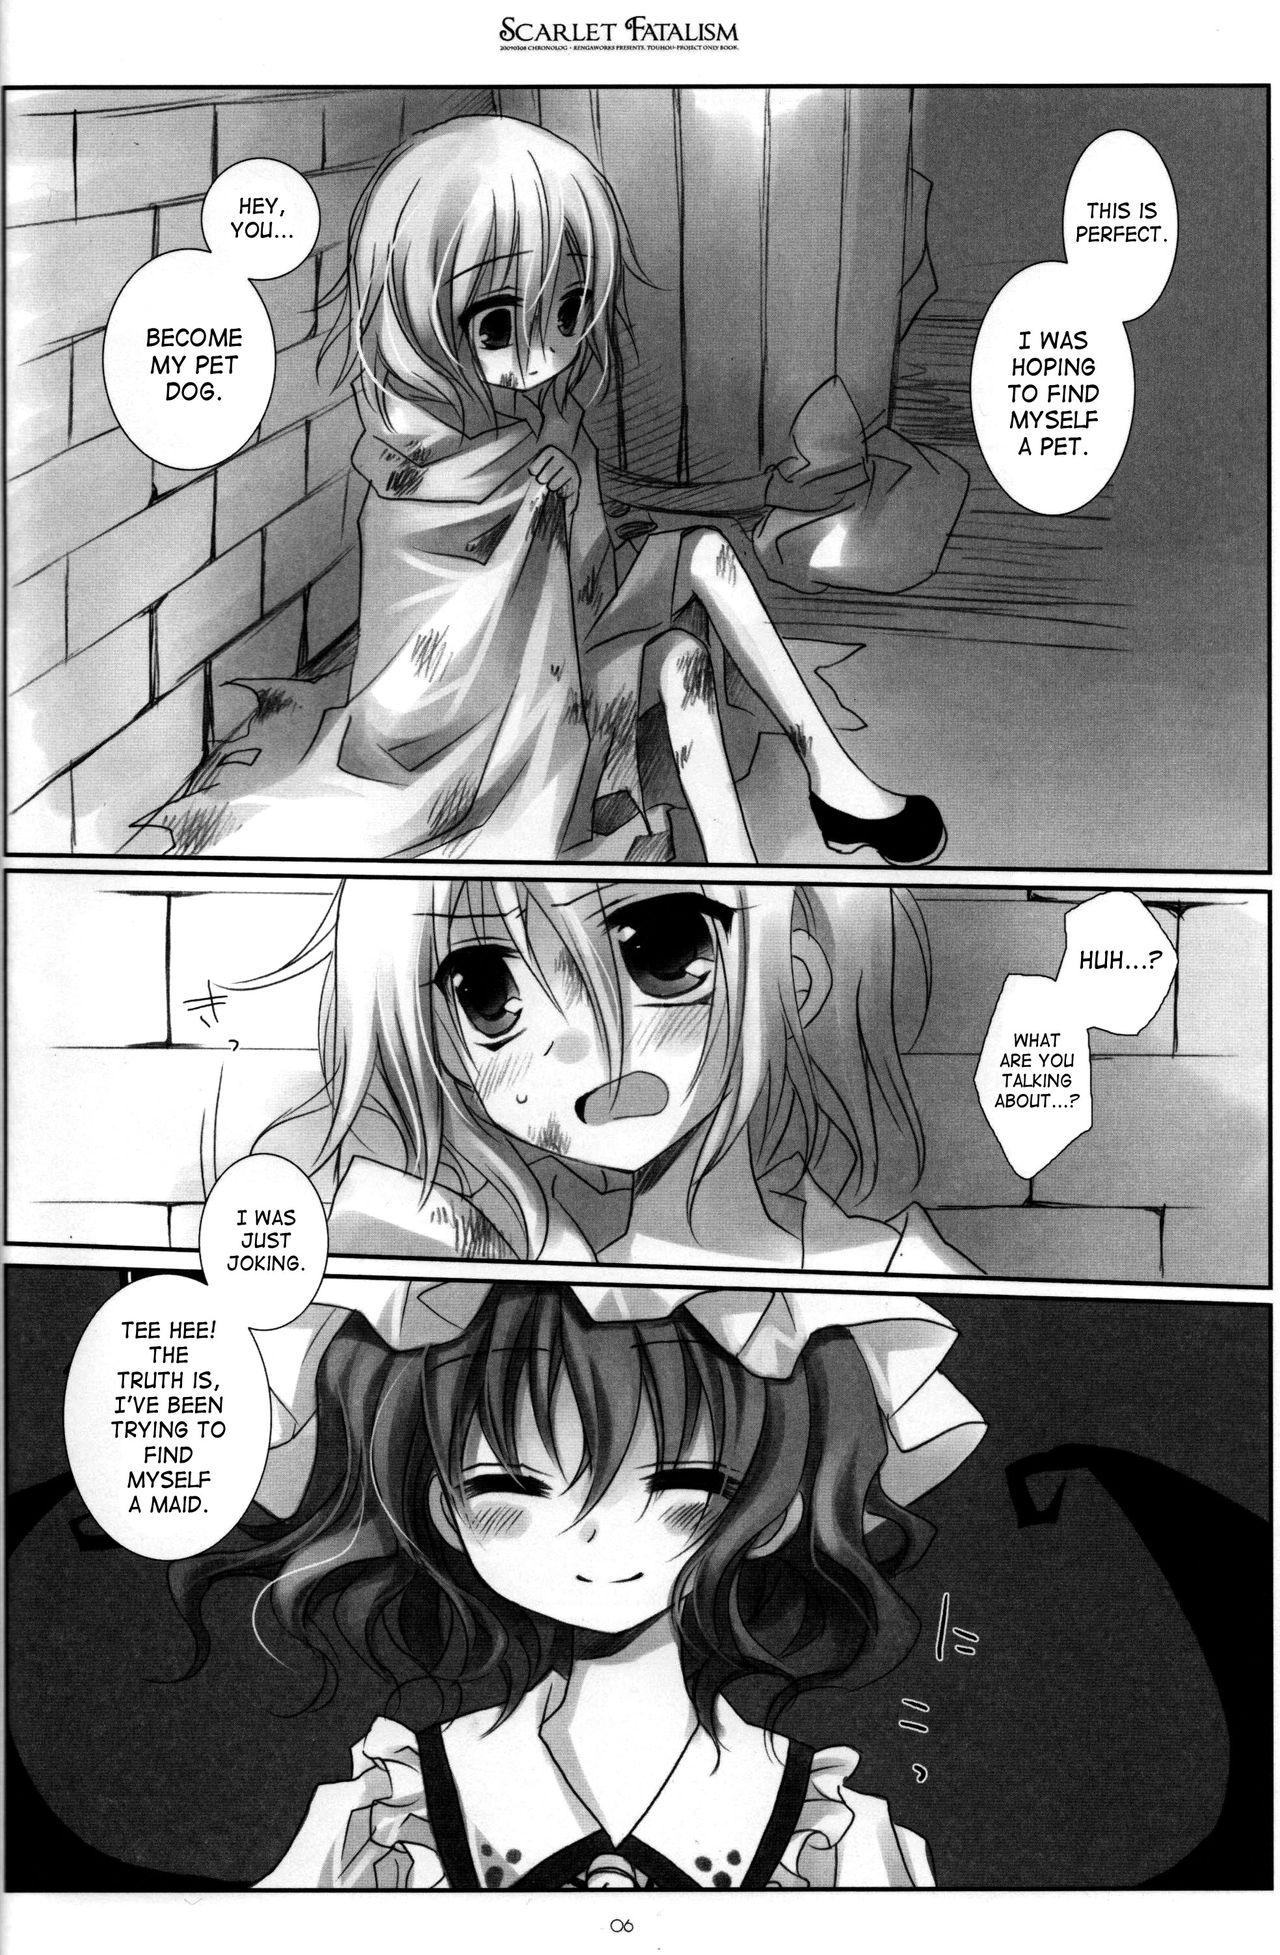 Usa Scarlet Fatalism - Touhou project Picked Up - Page 7